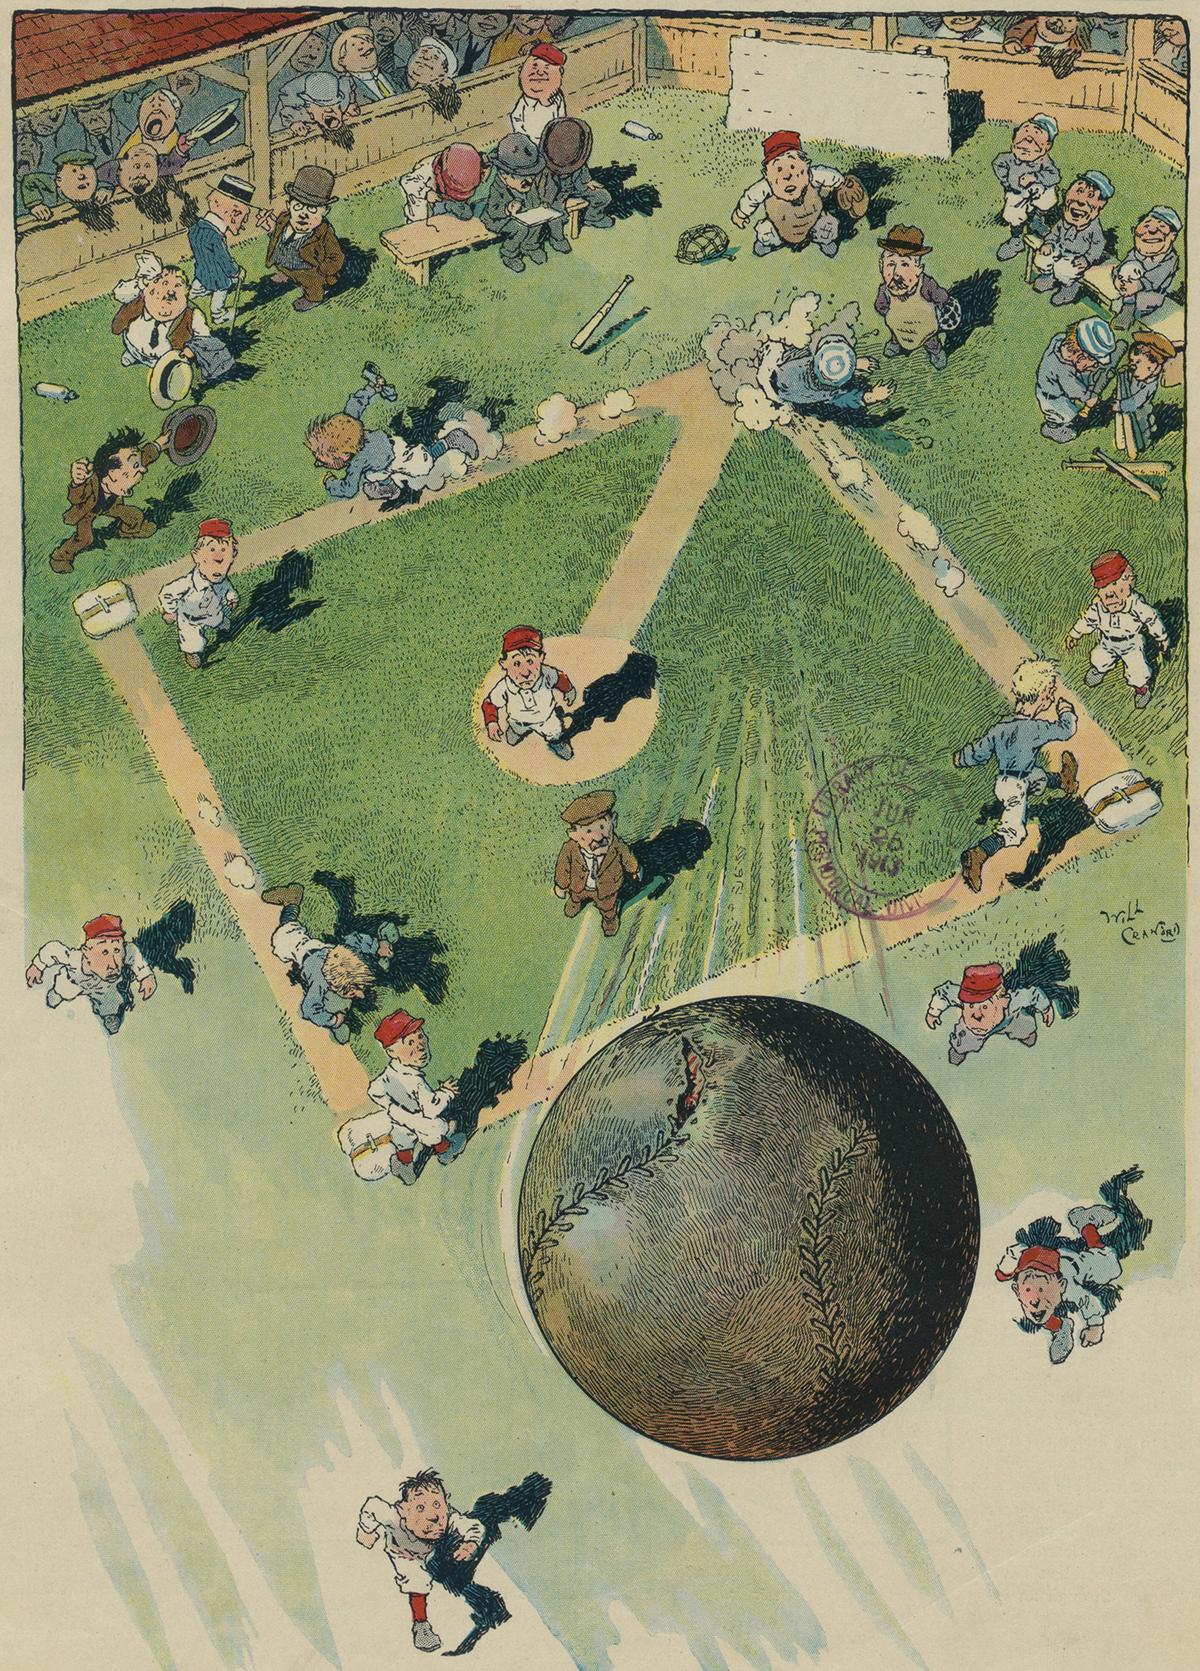  "Keep your eye on the ball" in business means staying focused on what is important. Cover illustration of "Ball's-Eye View of a Home Run" from the June 25, 1913, issue of Puck magazine by Will Crawford. Library of Congress. (Public Domain)